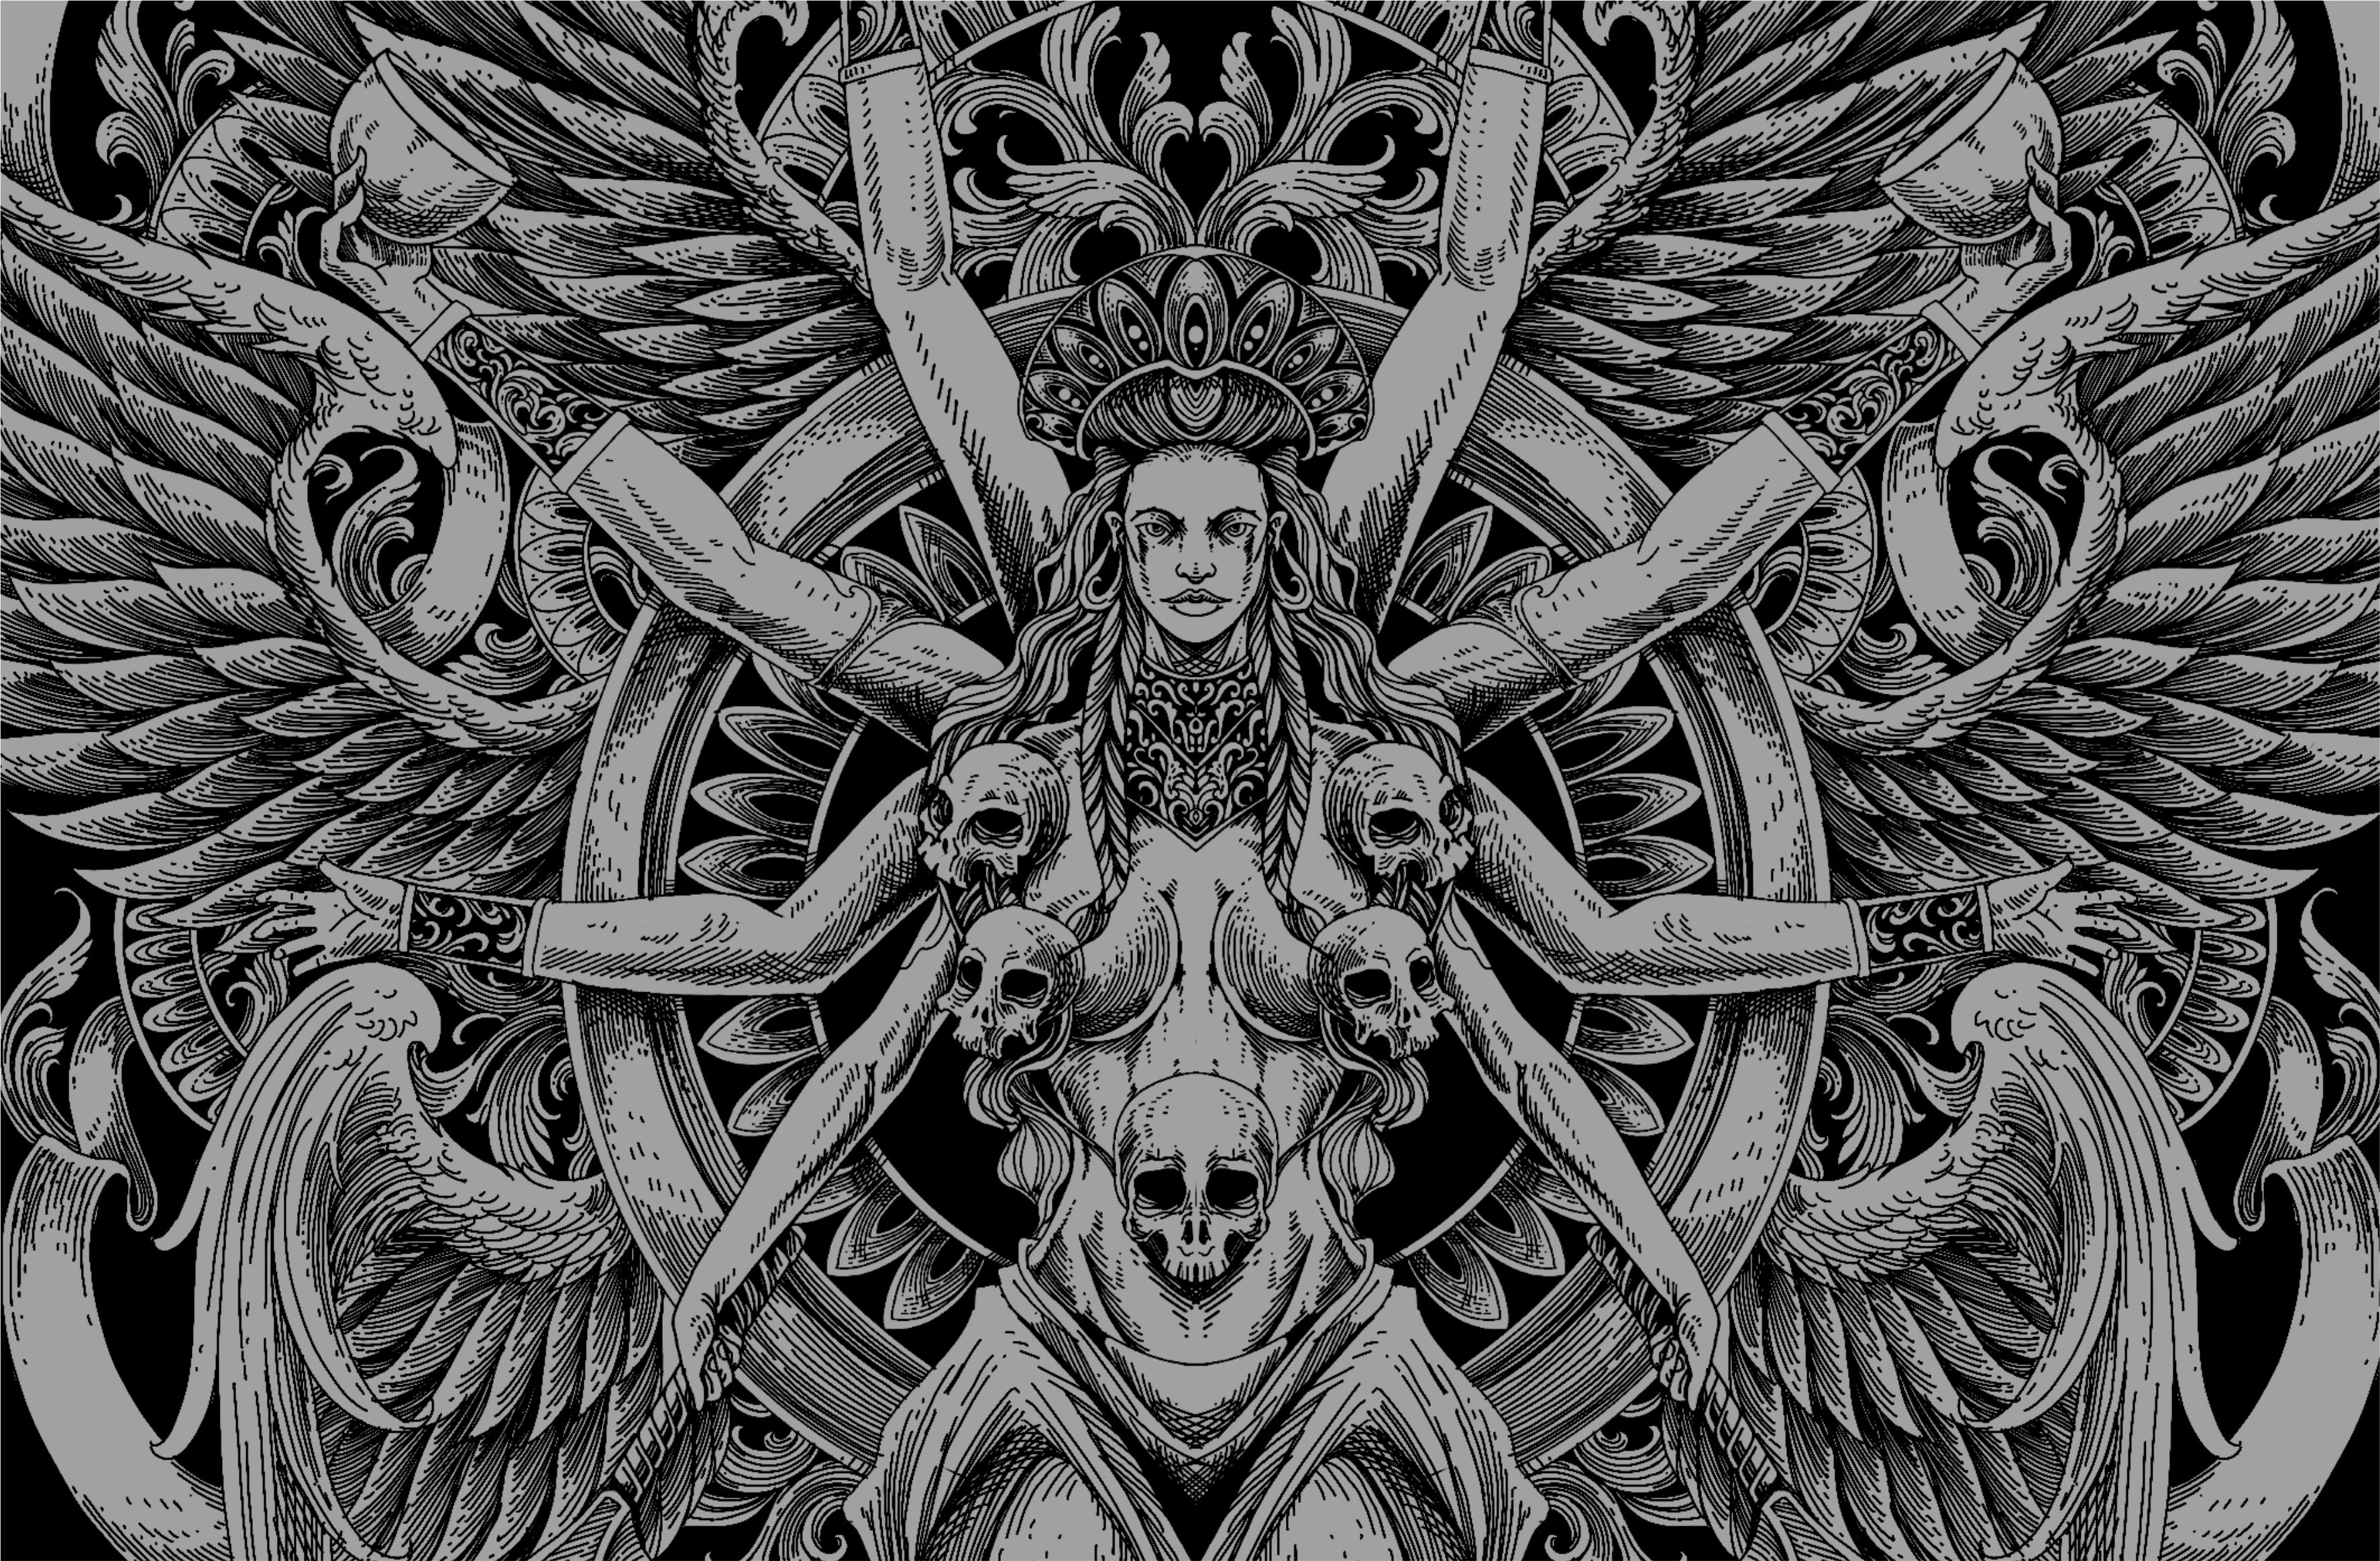 Draw a detailed dark art illustration with engraving style by